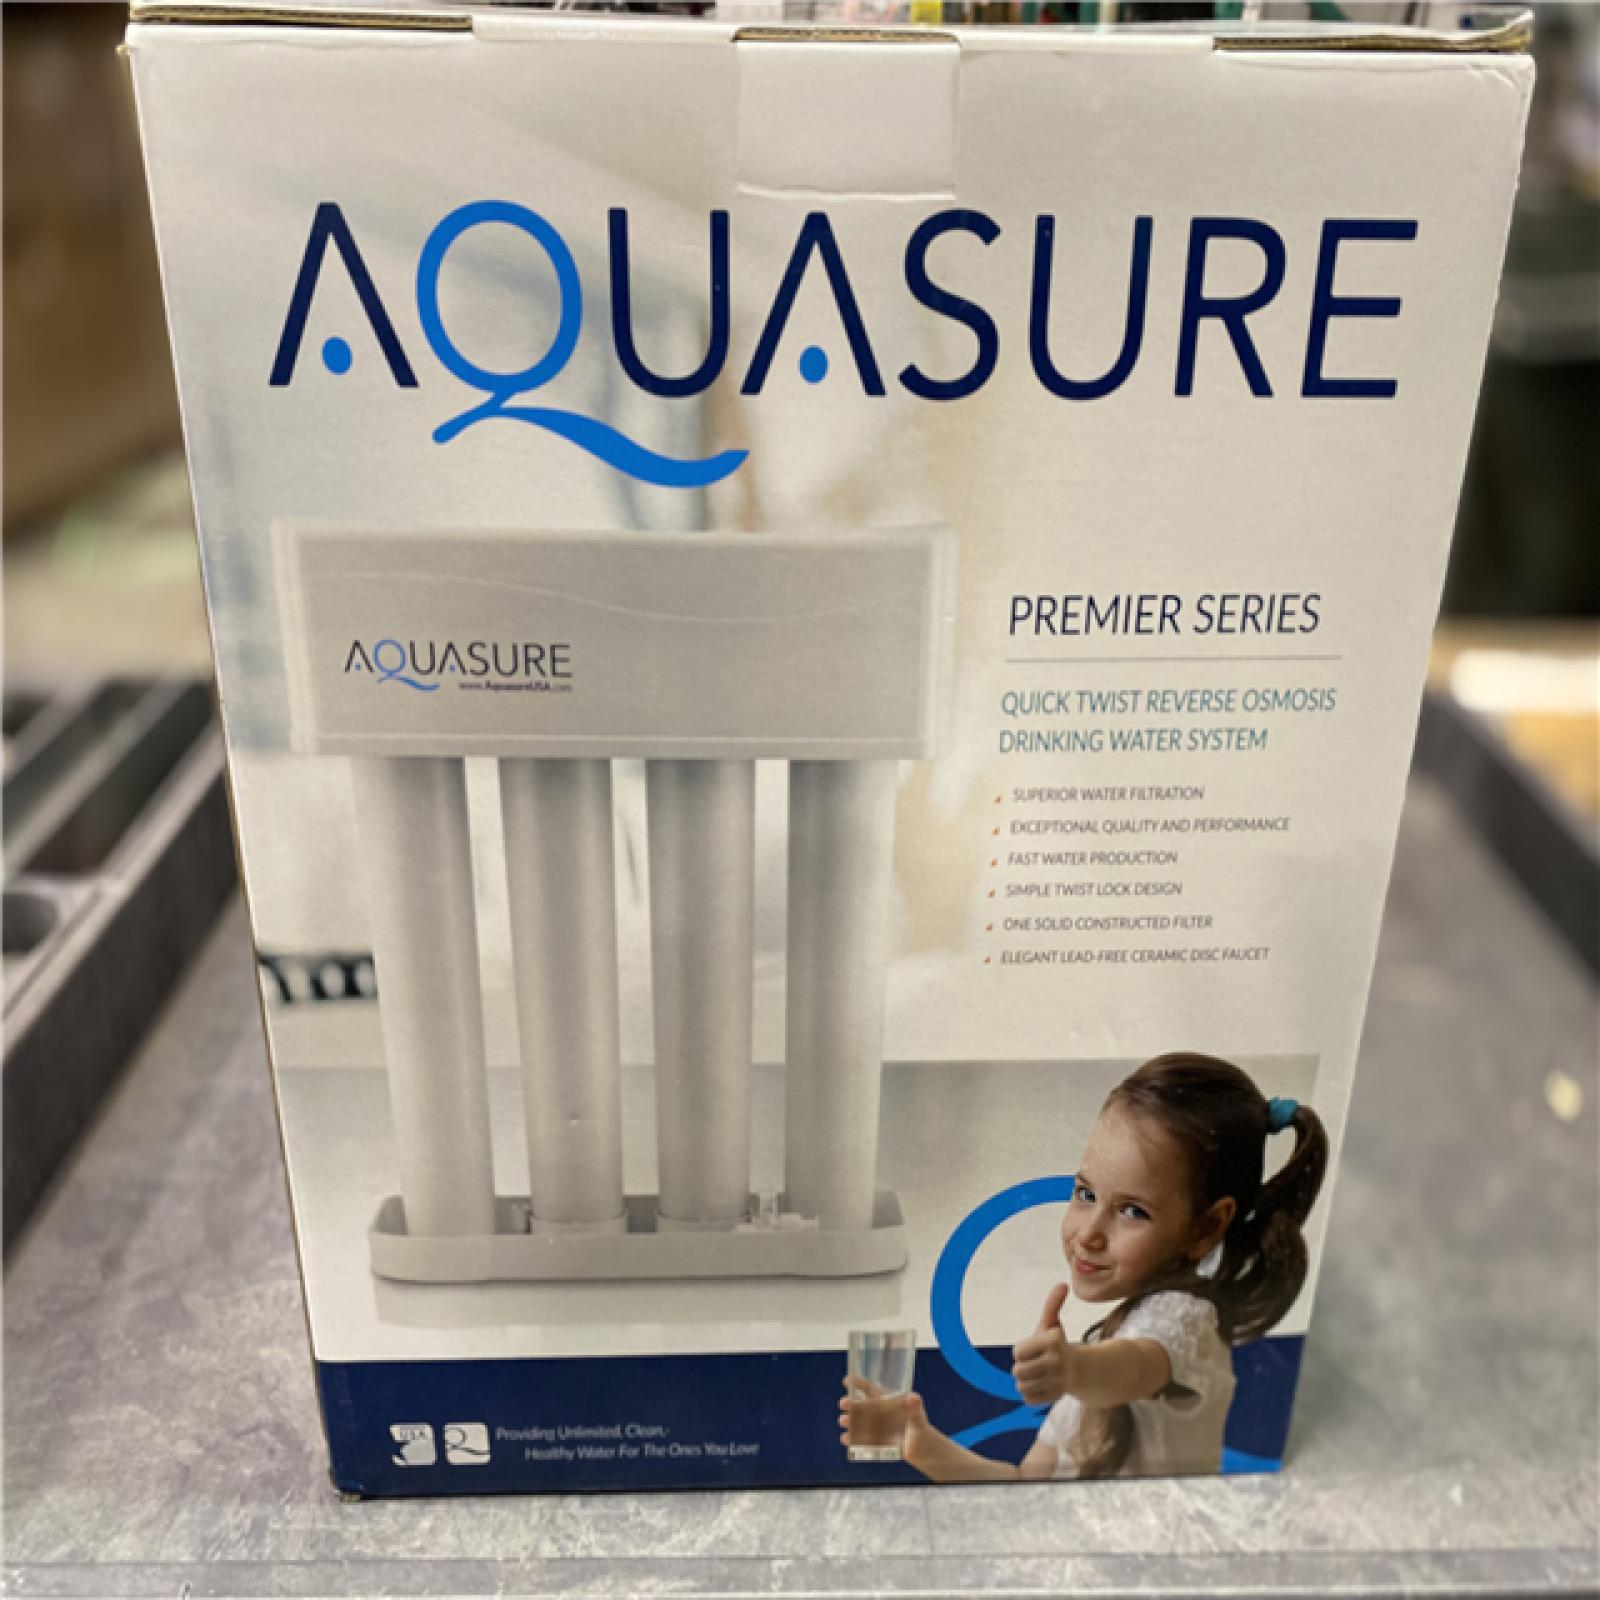 NEW! - Aquasure Premier Advanced Series 4-stage Reverse Osmosis Water Filtration System with Chrome Faucet